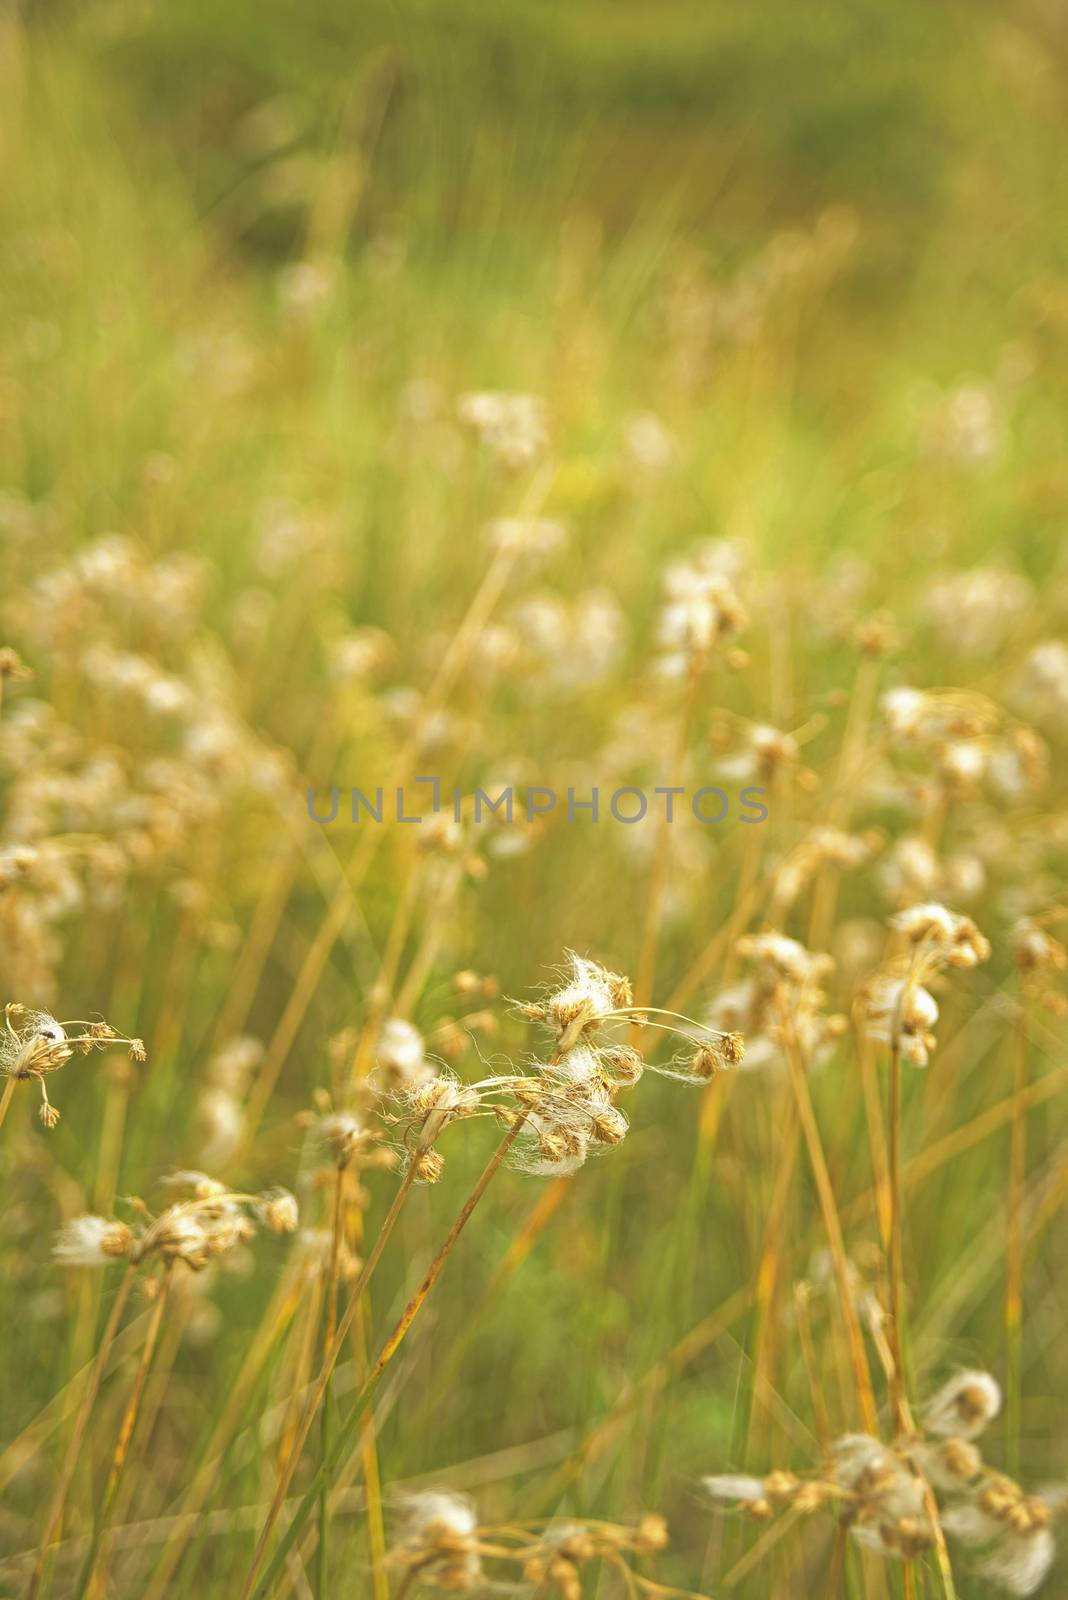 Sunny day in the countryside, closeup of green grass and wild flowers with vintage filter effect and blur background.